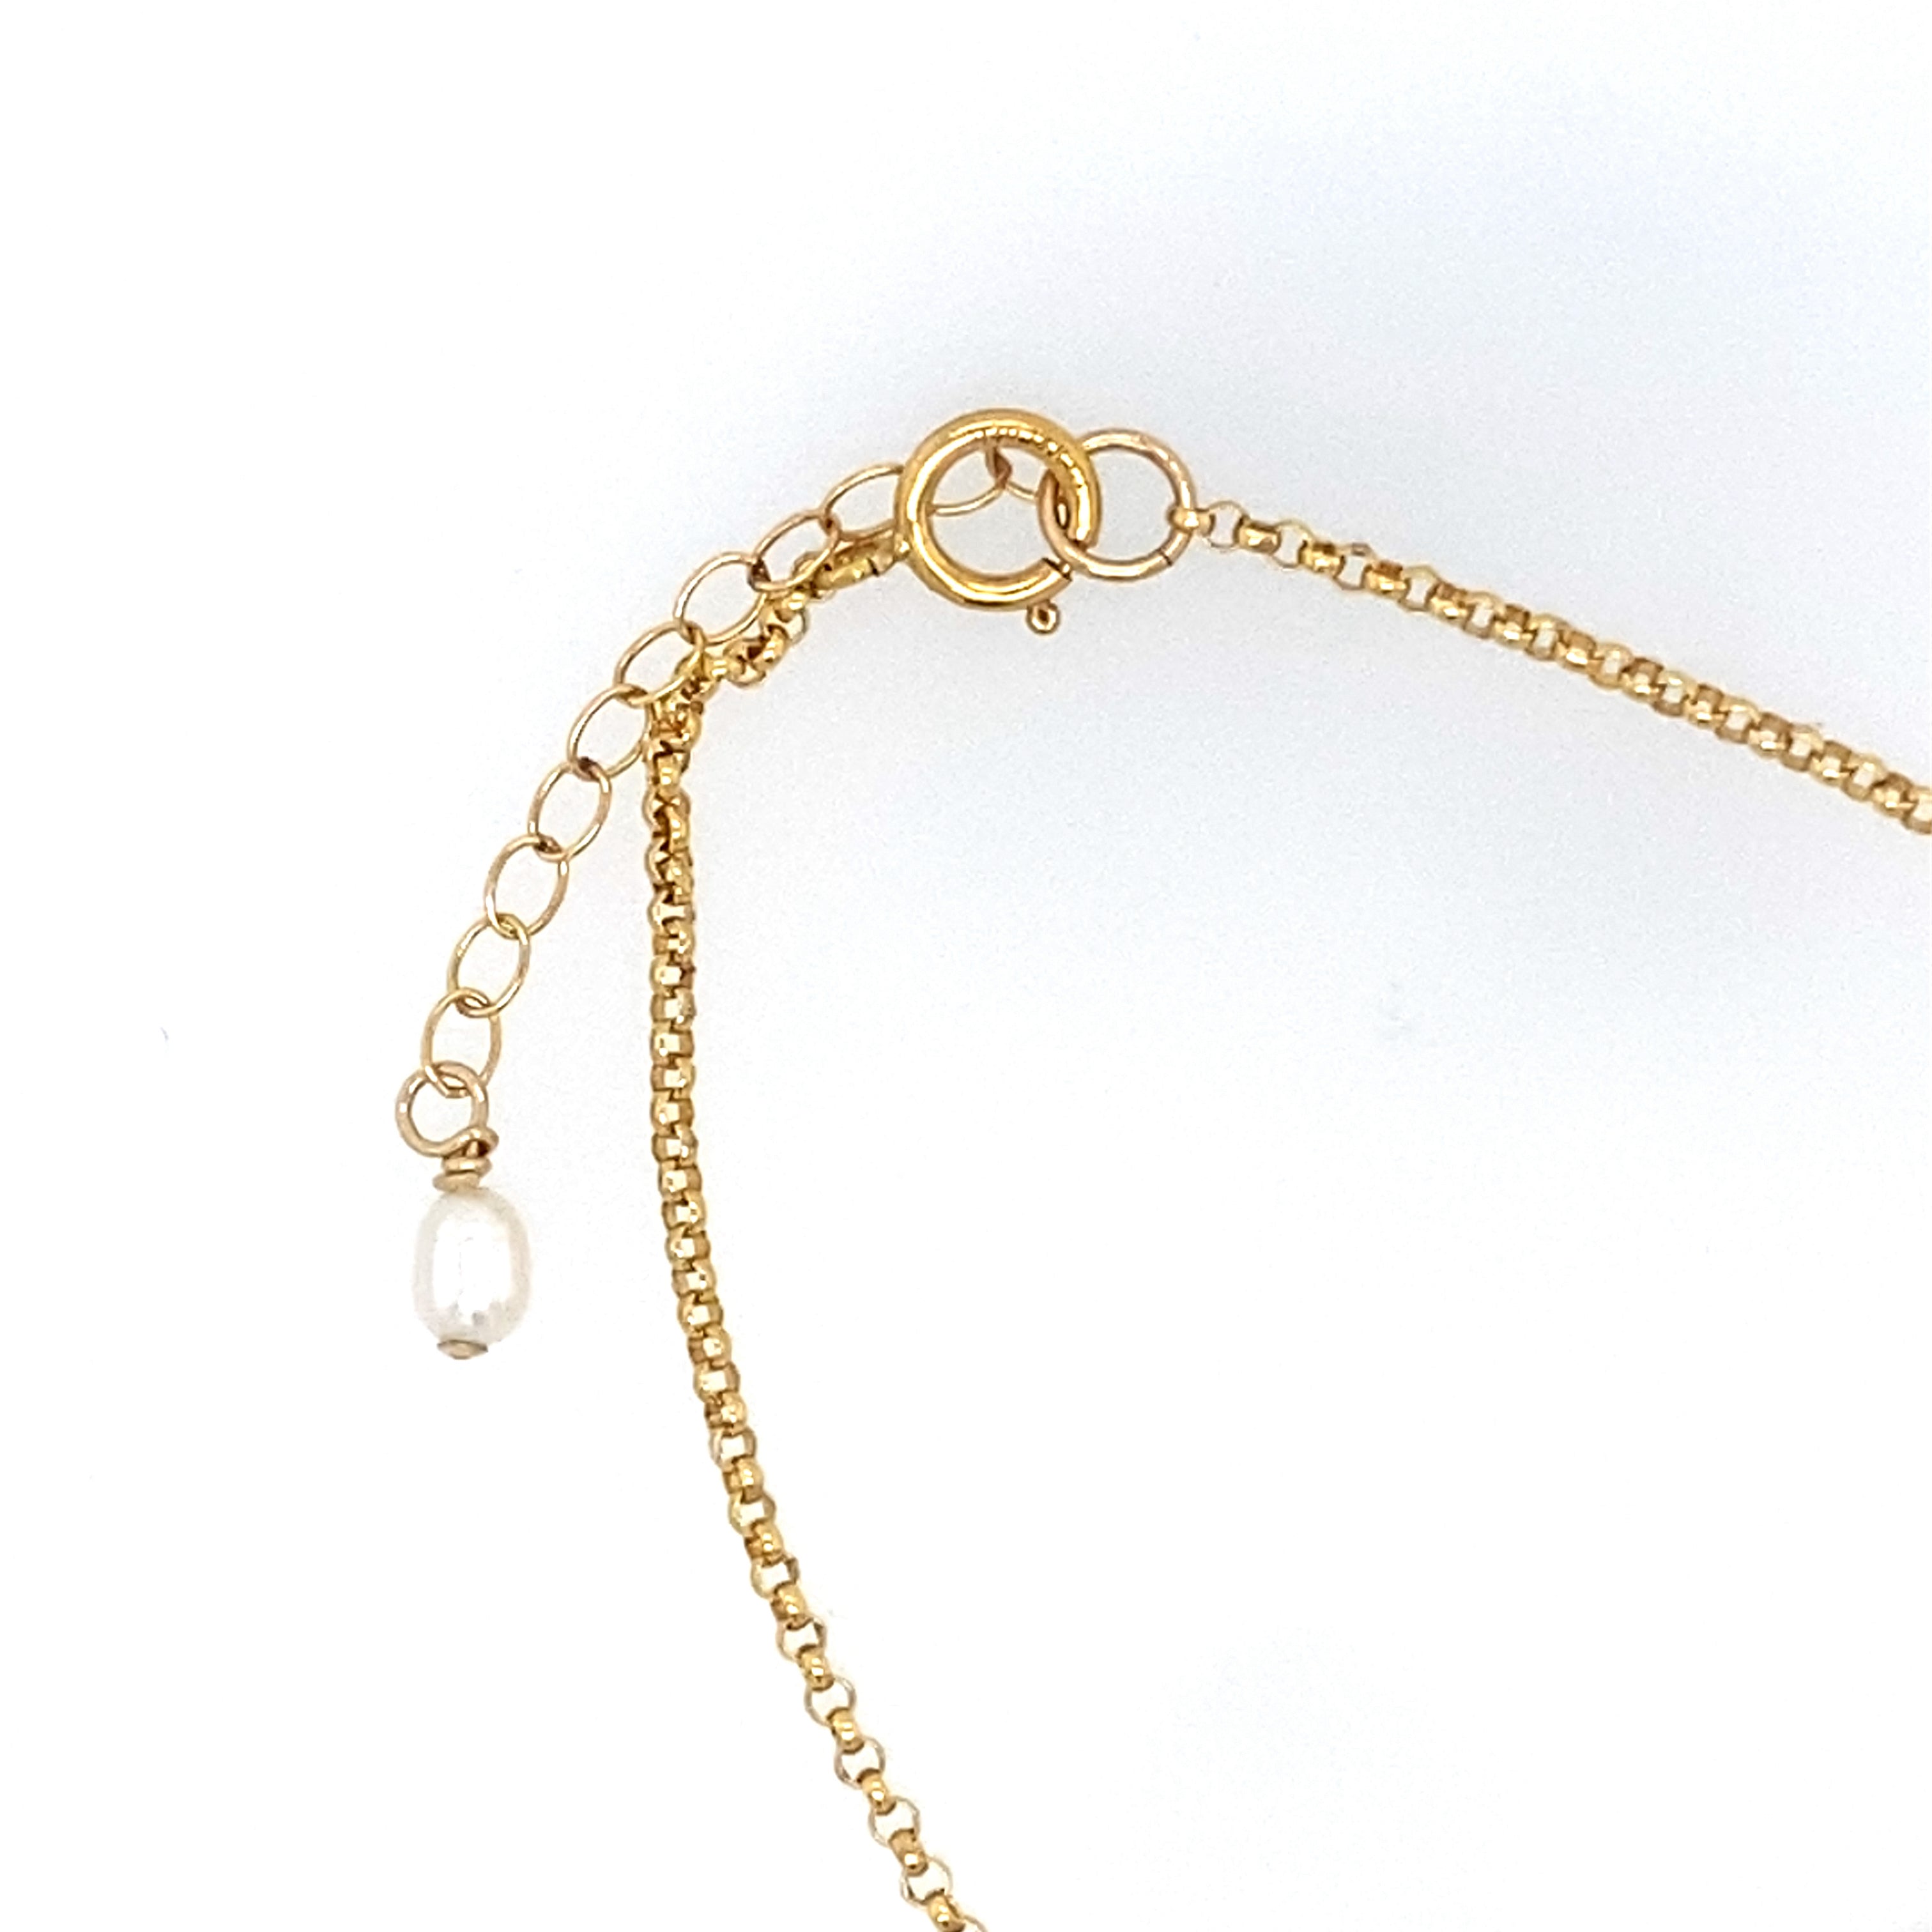 Petite Chain armband  met zoetwater parels